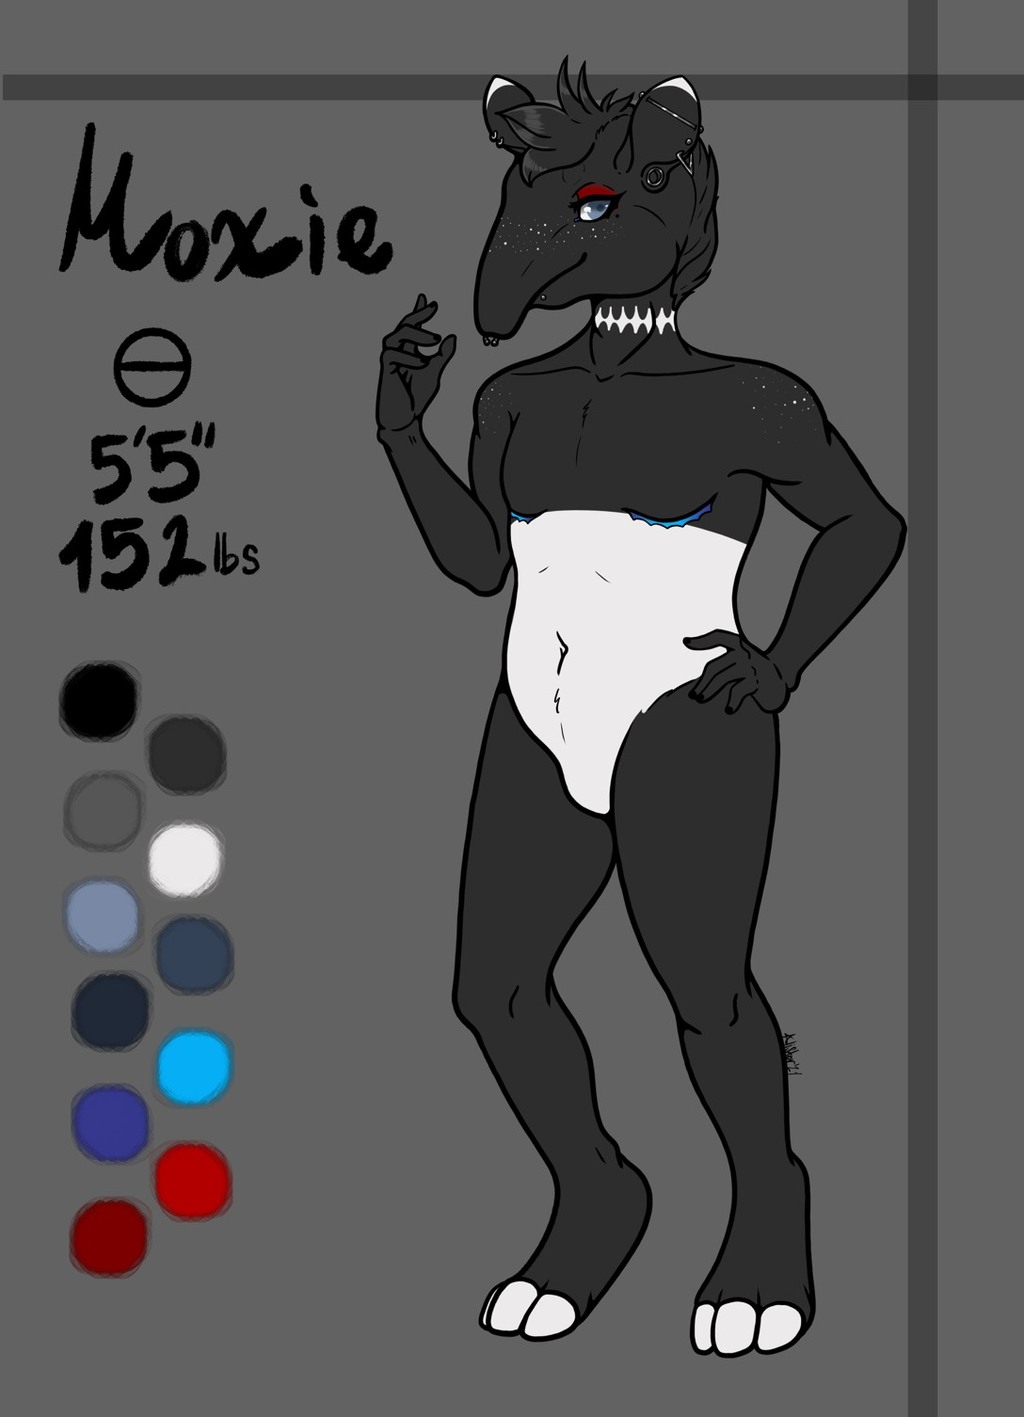 Most recent image: Moxie